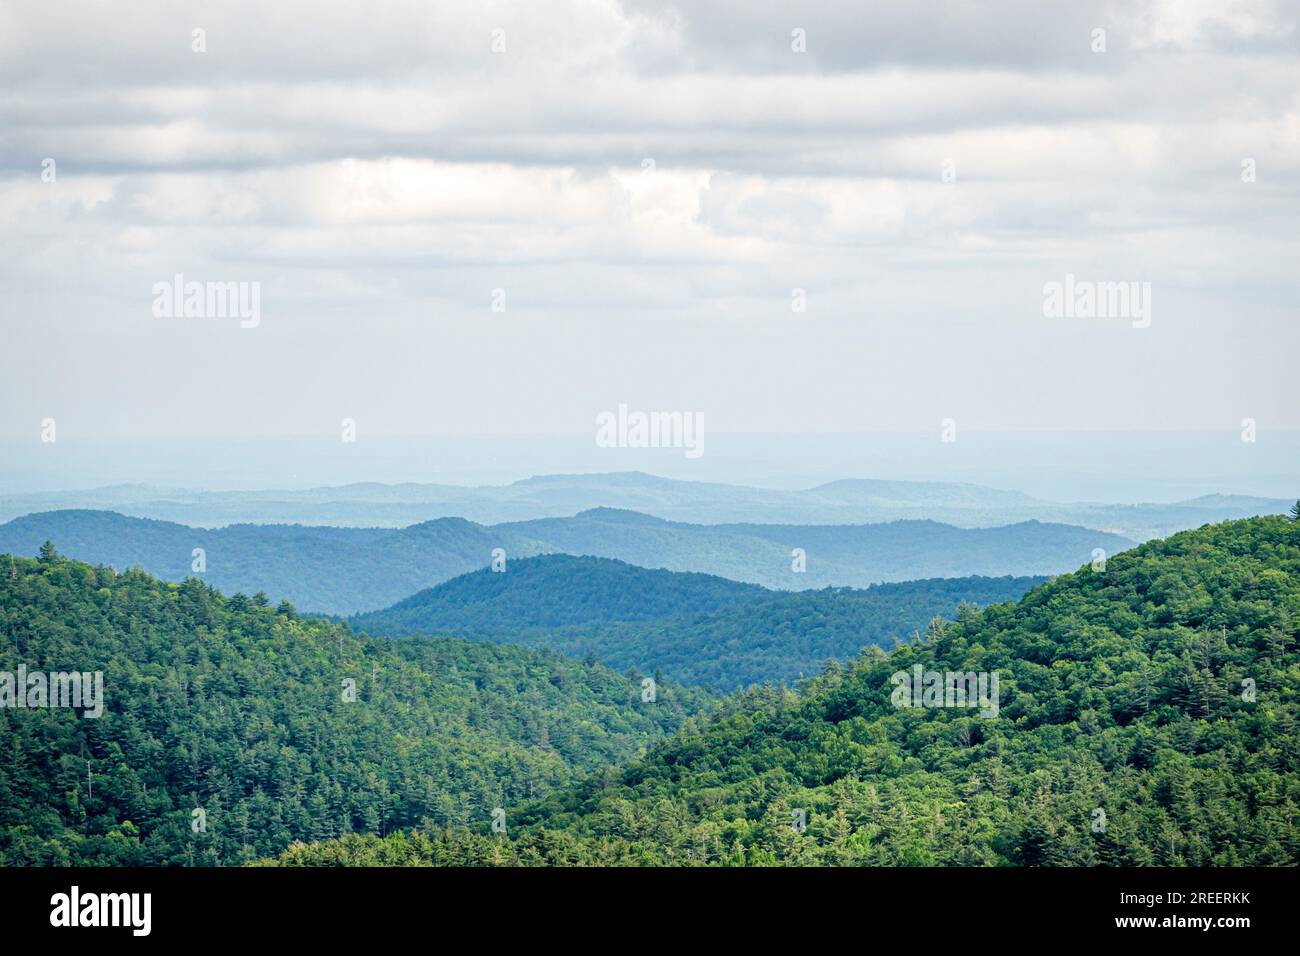 Sky Valley Georgia,Blue Valley Overlook Nantahala National Forest,panoramic view distant tree covered ridges,Appalachian Blue Ridge Mountains Stock Photo